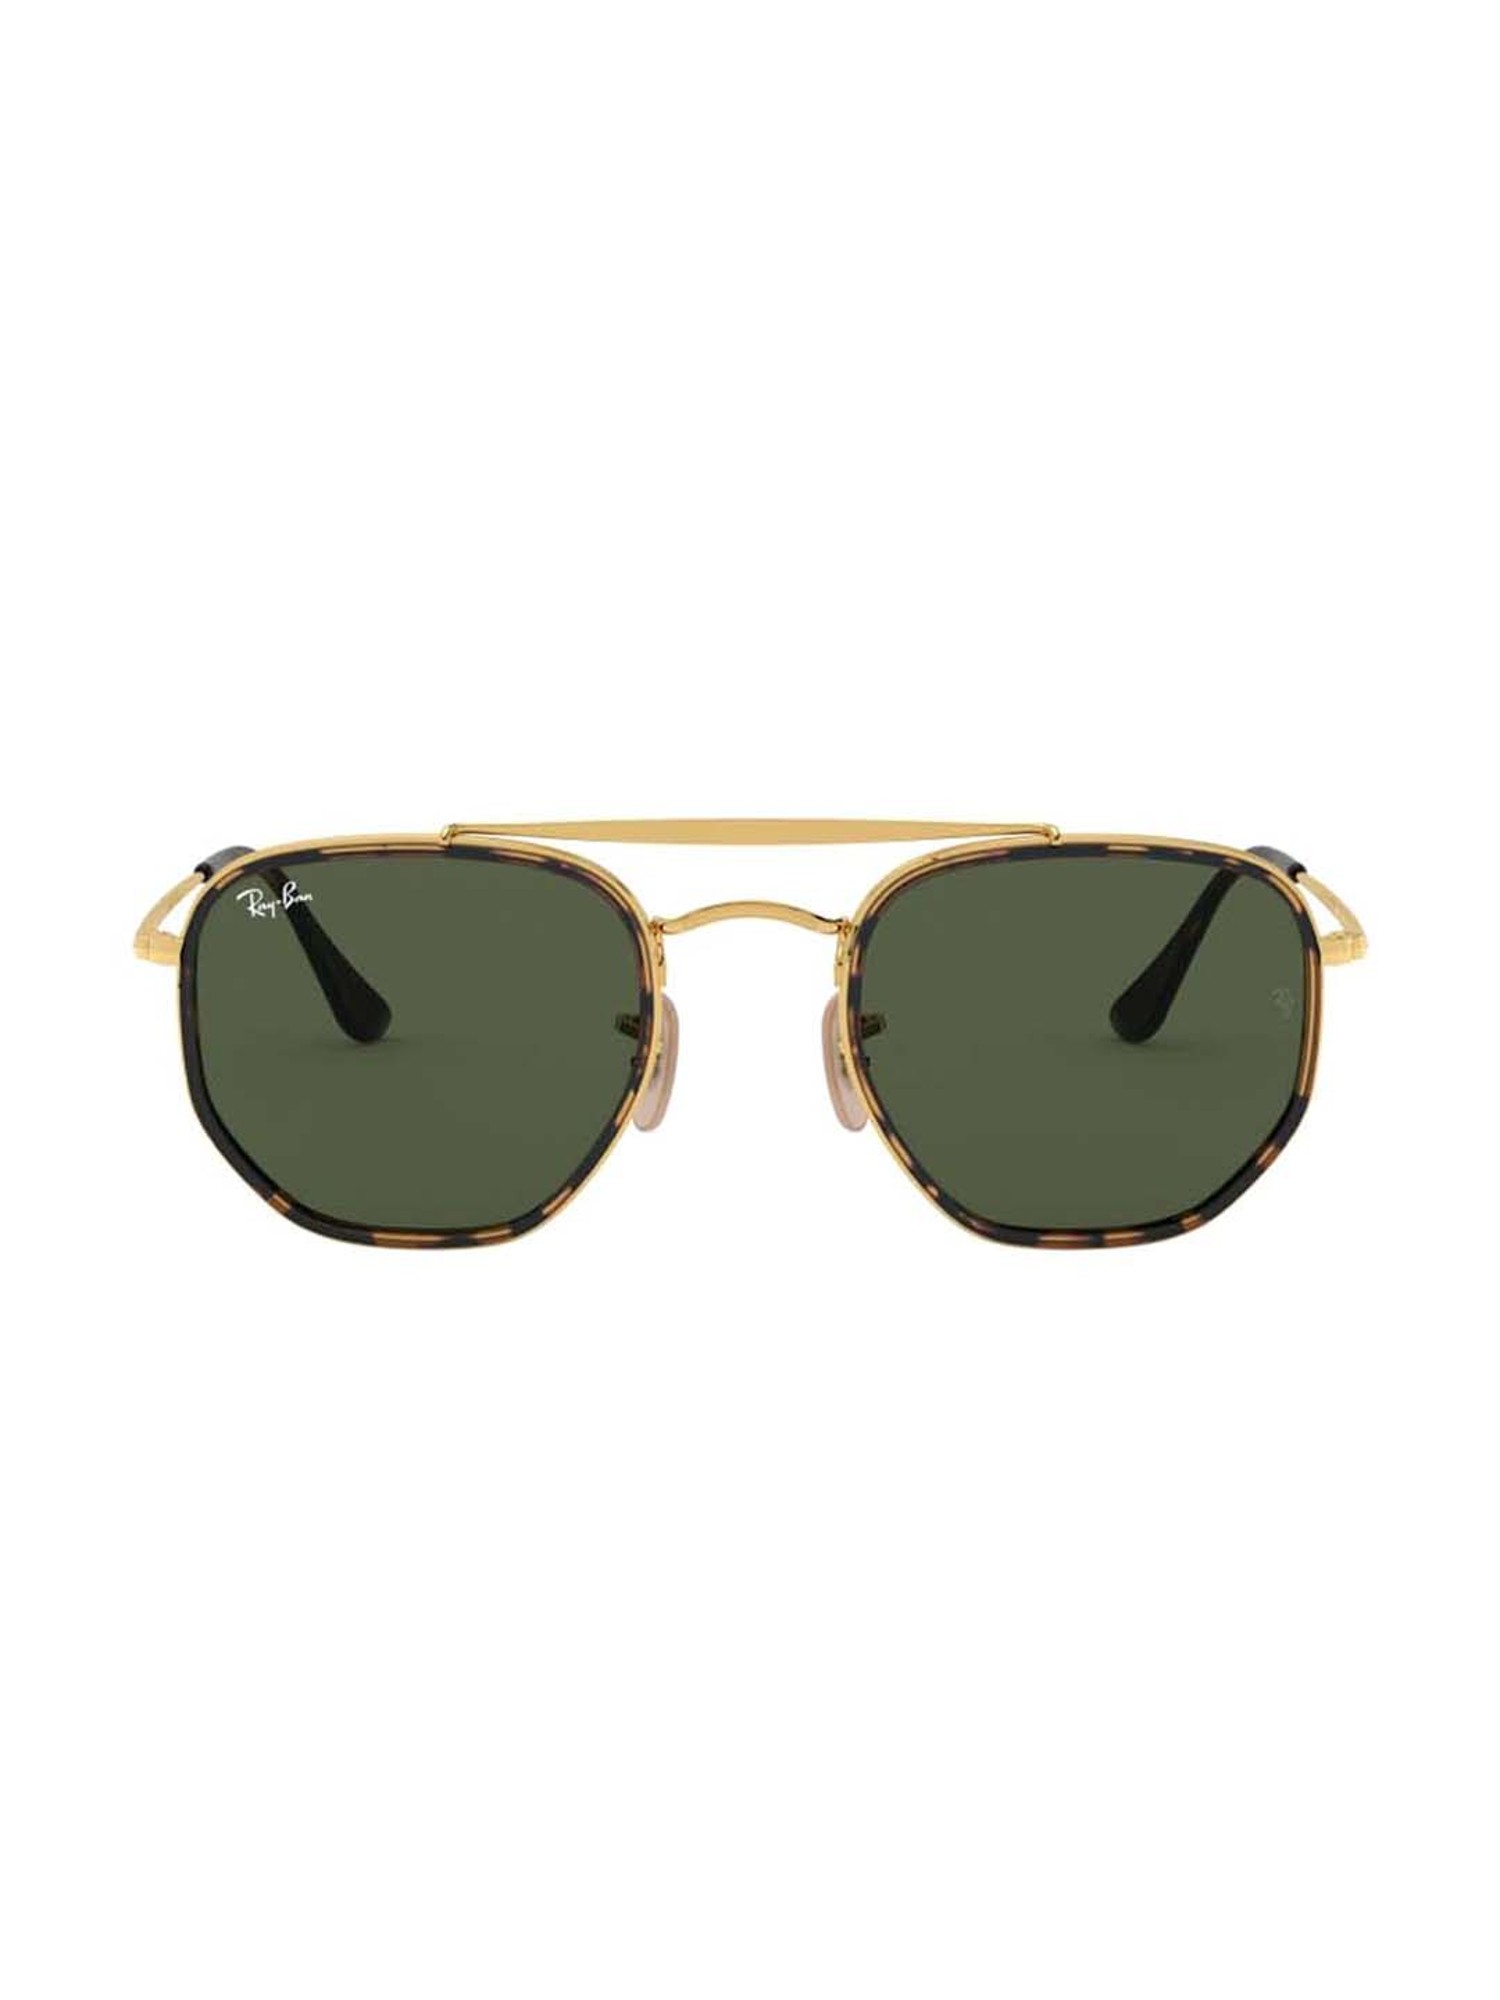 Buy Ray Ban 0rb3648m Green The Marshal Ii Round Sunglasses 52 Mm Online At Best Prices Tata Cliq